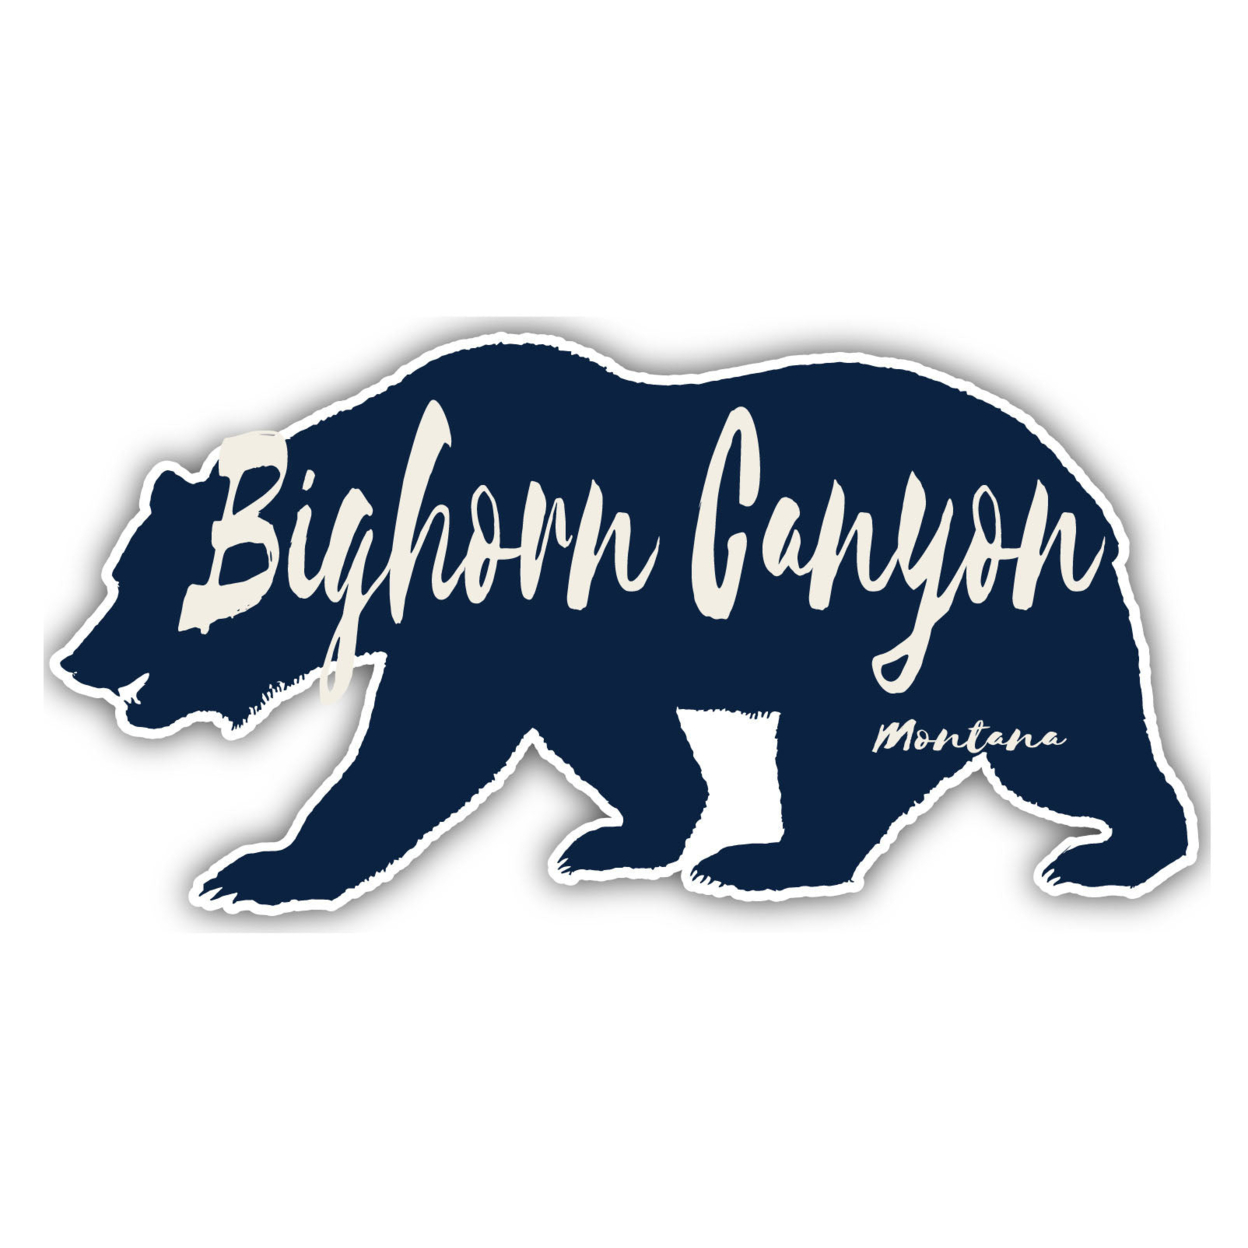 Bighorn Canyon Montana Souvenir Decorative Stickers (Choose Theme And Size) - 4-Pack, 10-Inch, Bear